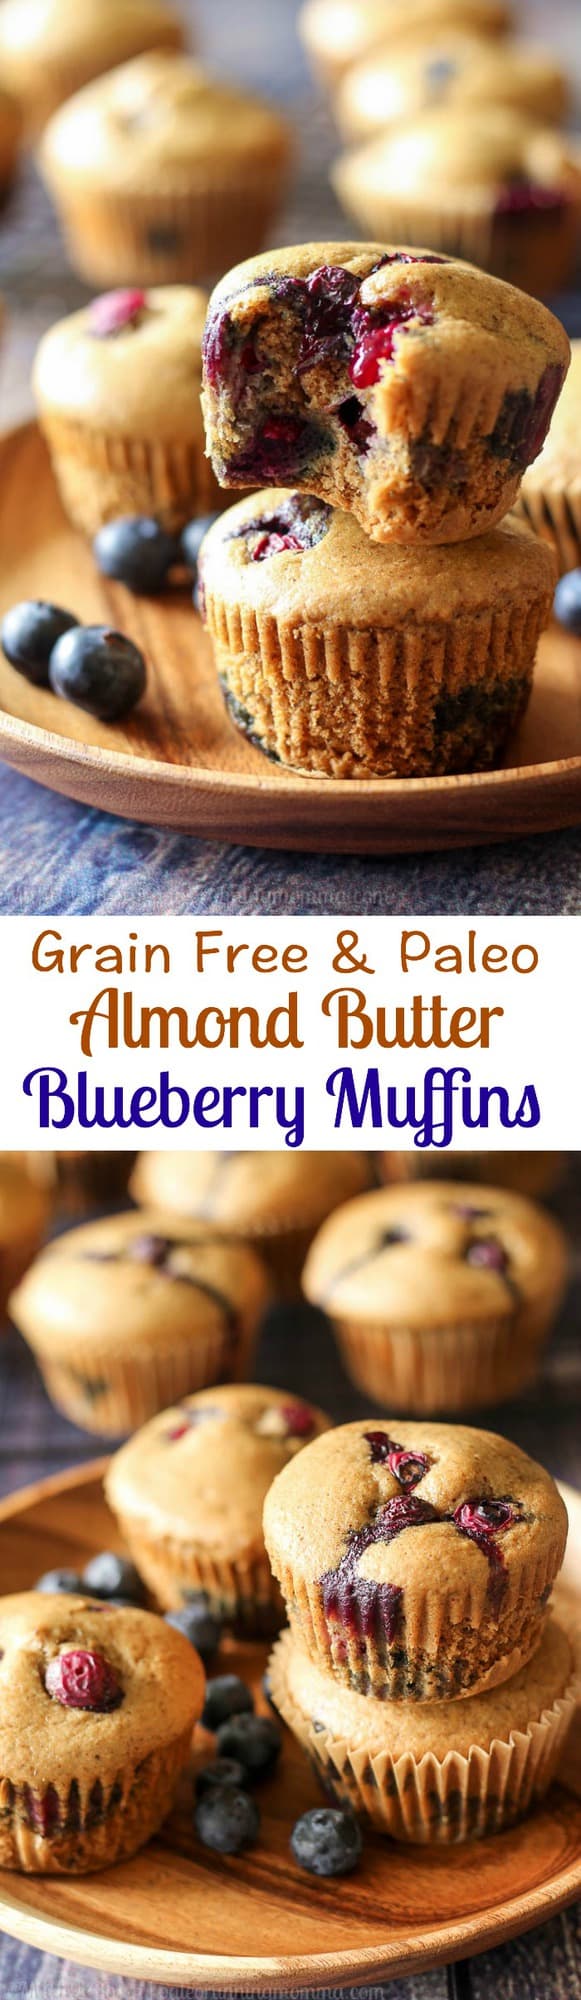 Simple grain free and paleo blueberry muffin made with almond butter for amazing flavor and texture. Healthy breakfast o